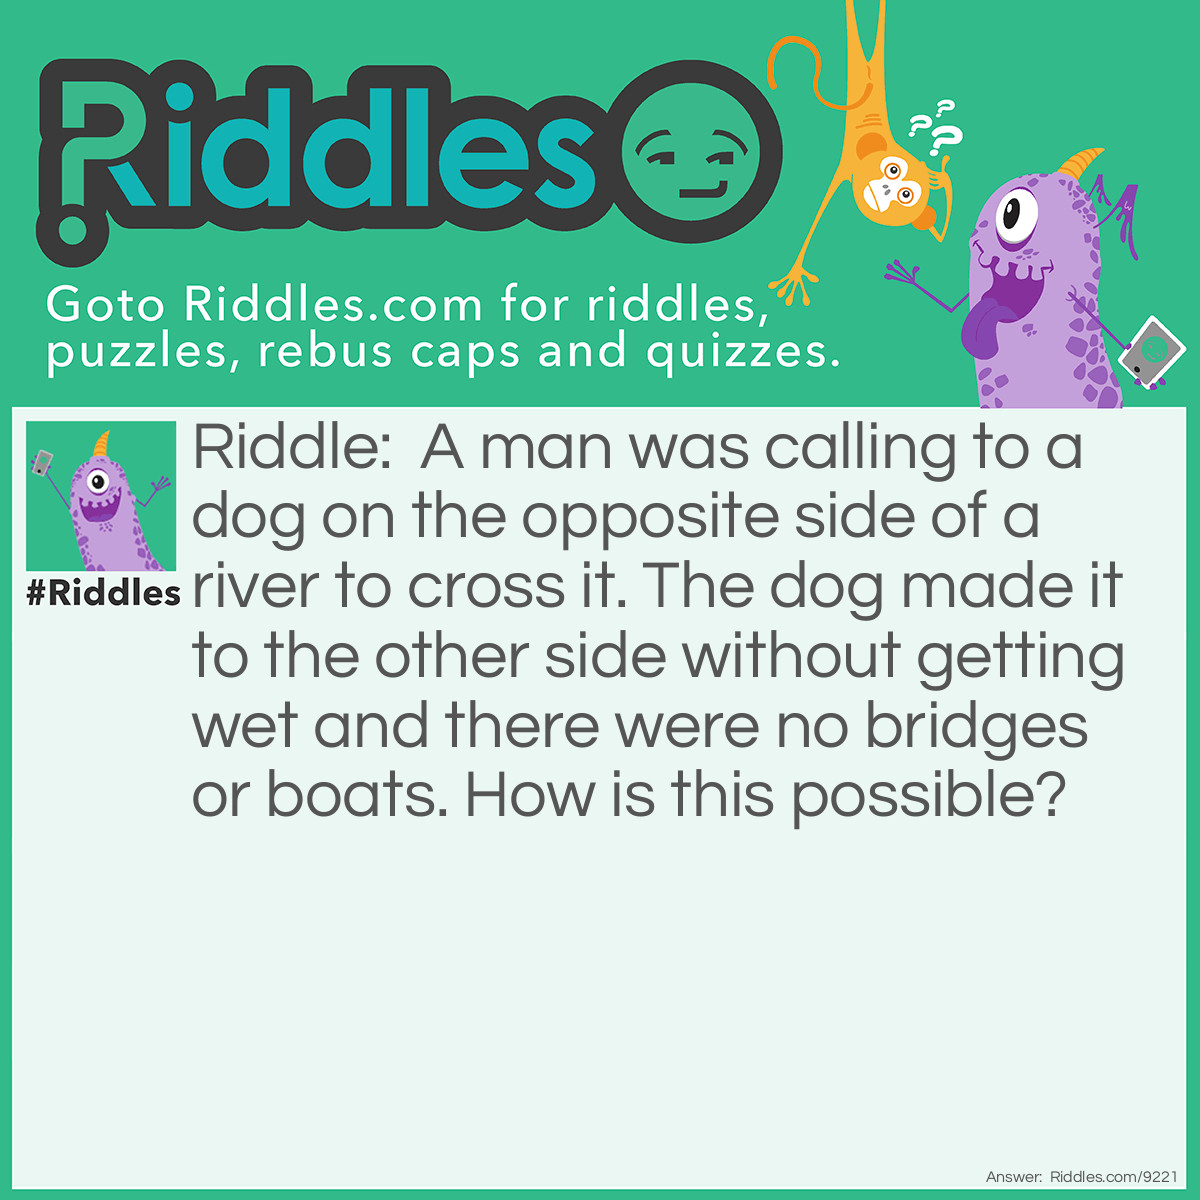 Riddle: A man was calling to a dog on the opposite side of a river to cross it. The dog made it to the other side without getting wet and there were no bridges or boats. How is this possible? Answer: The river was frozen.